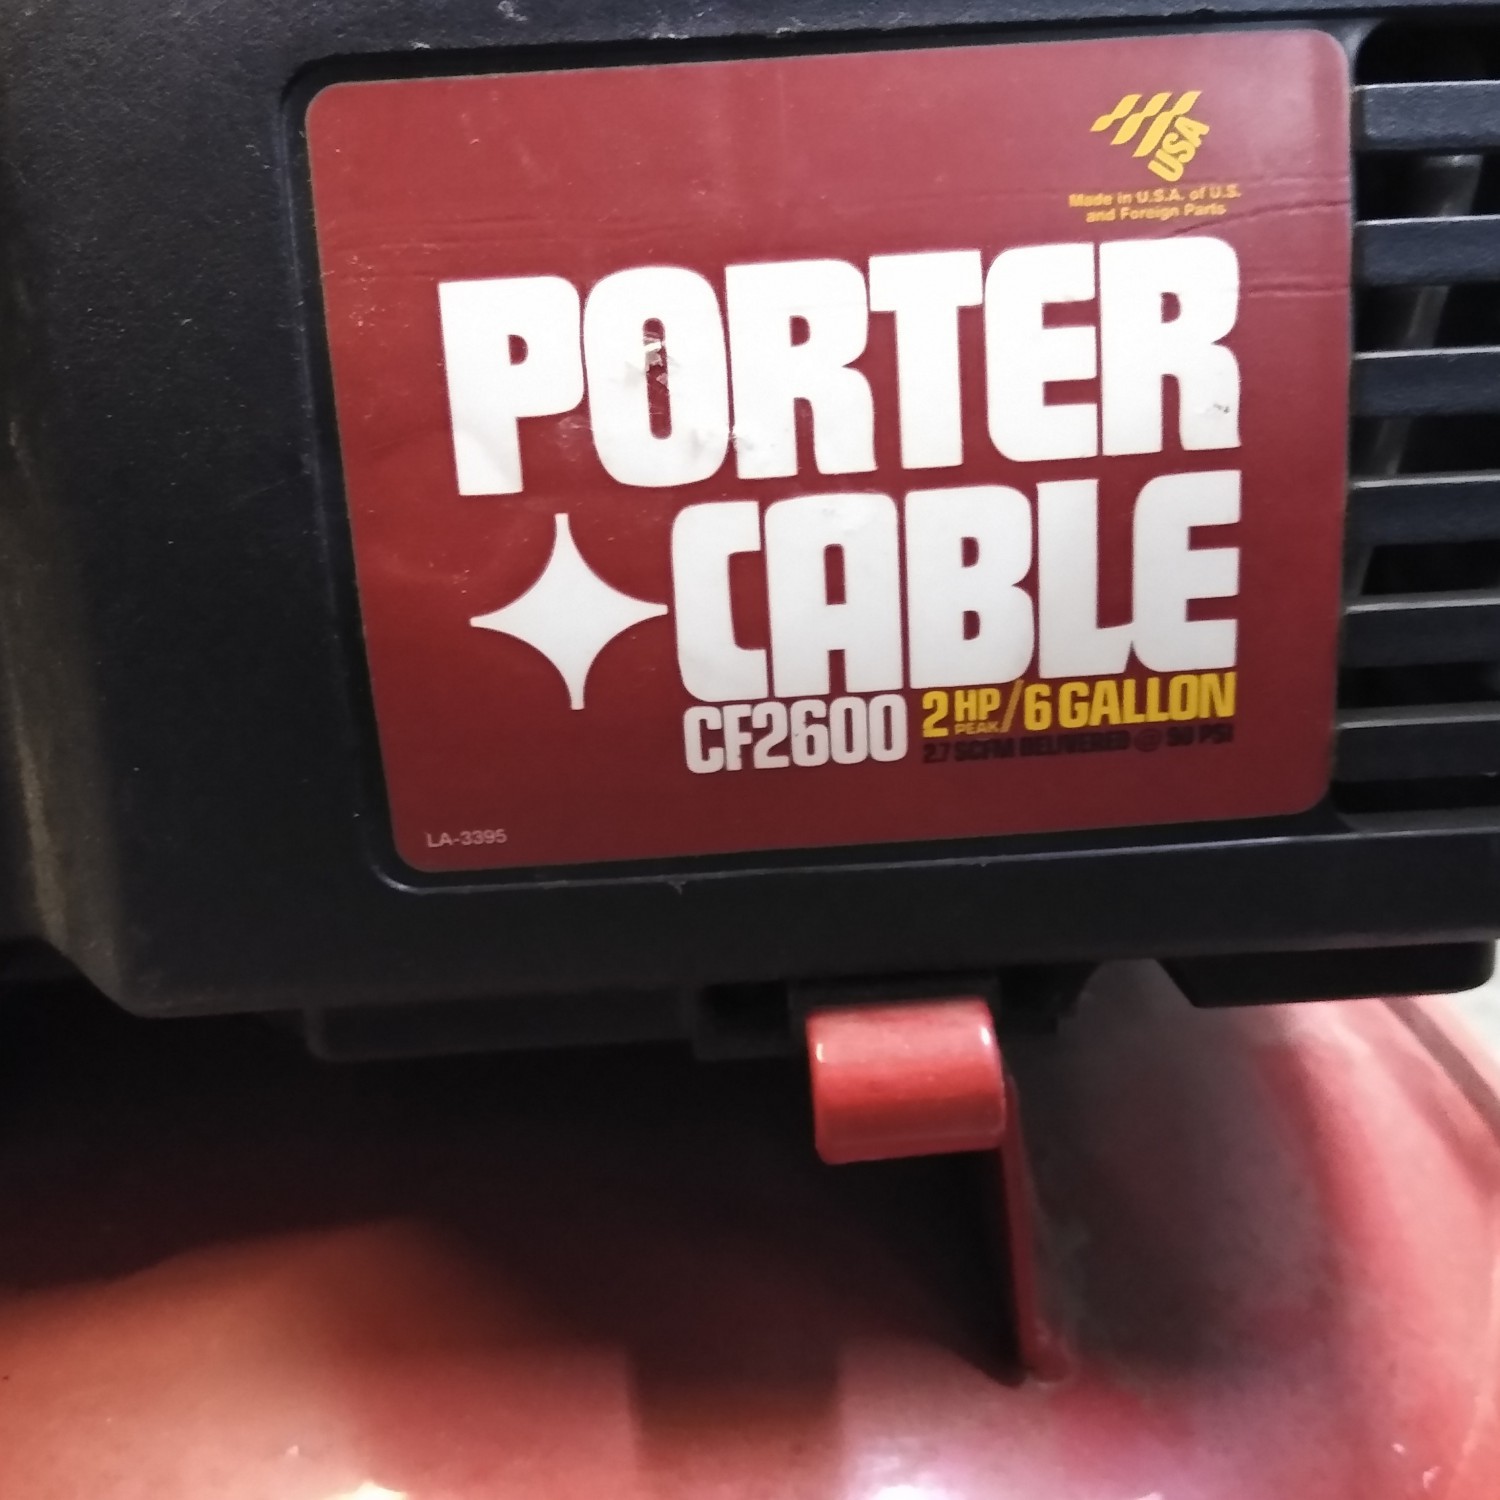 Porter Cable 6 gallon compressor. Works great.